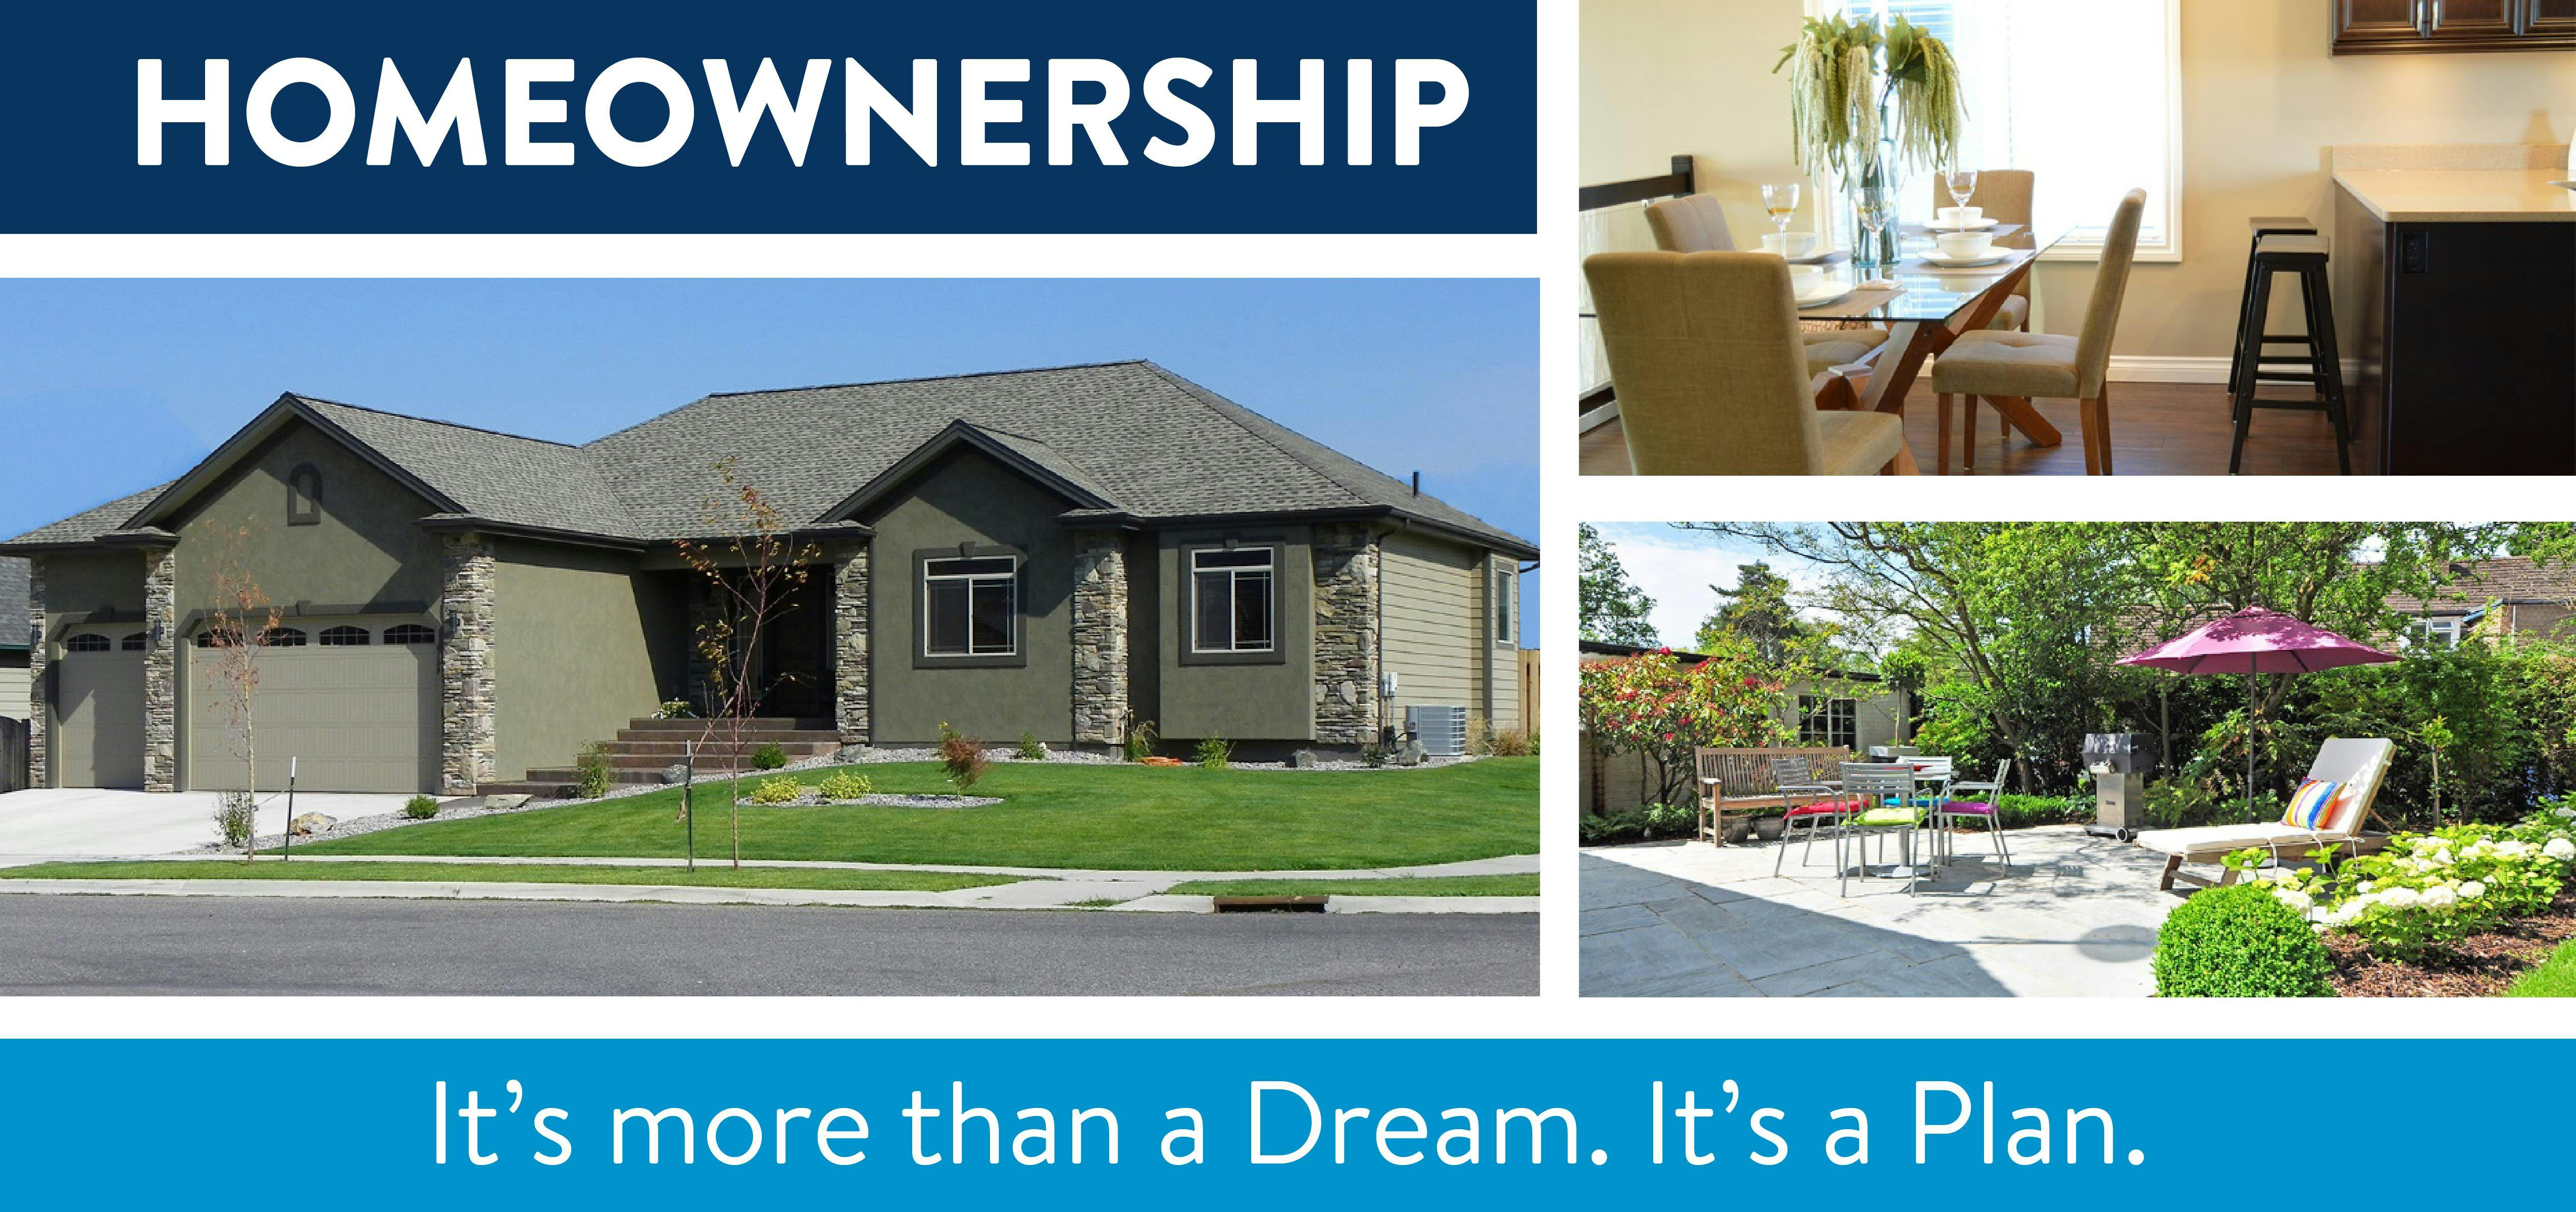 Homeownership: It's more than a Dream. It's a Plan.